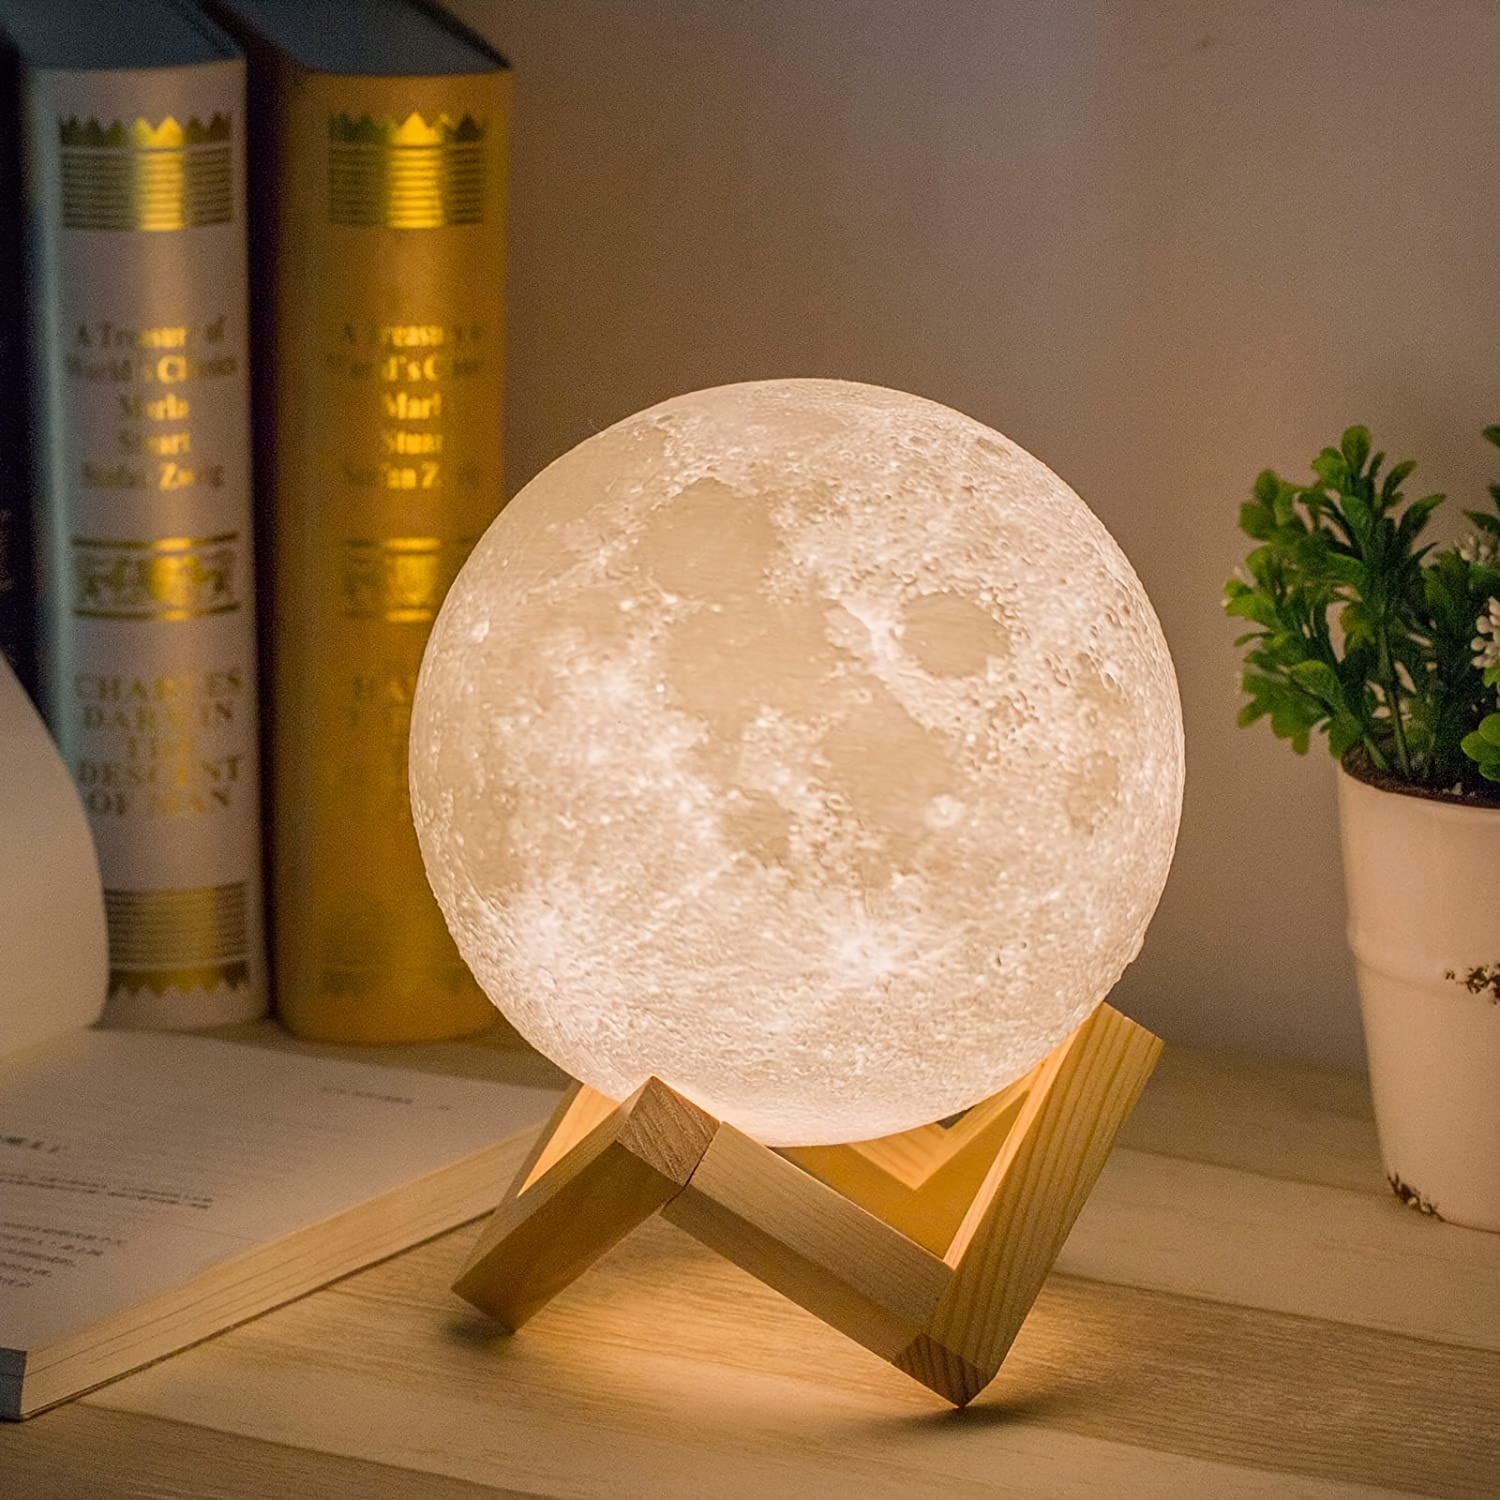 Mind-Glowing Galaxy Moon Lamp - Cool Space Night Light for Kids -  Touch/Remote Control, 16 Colors, Stand - Teen Girls Trendy Stuff - Birthday  Gifts Ideas for Any Year Old Teenage Girl (